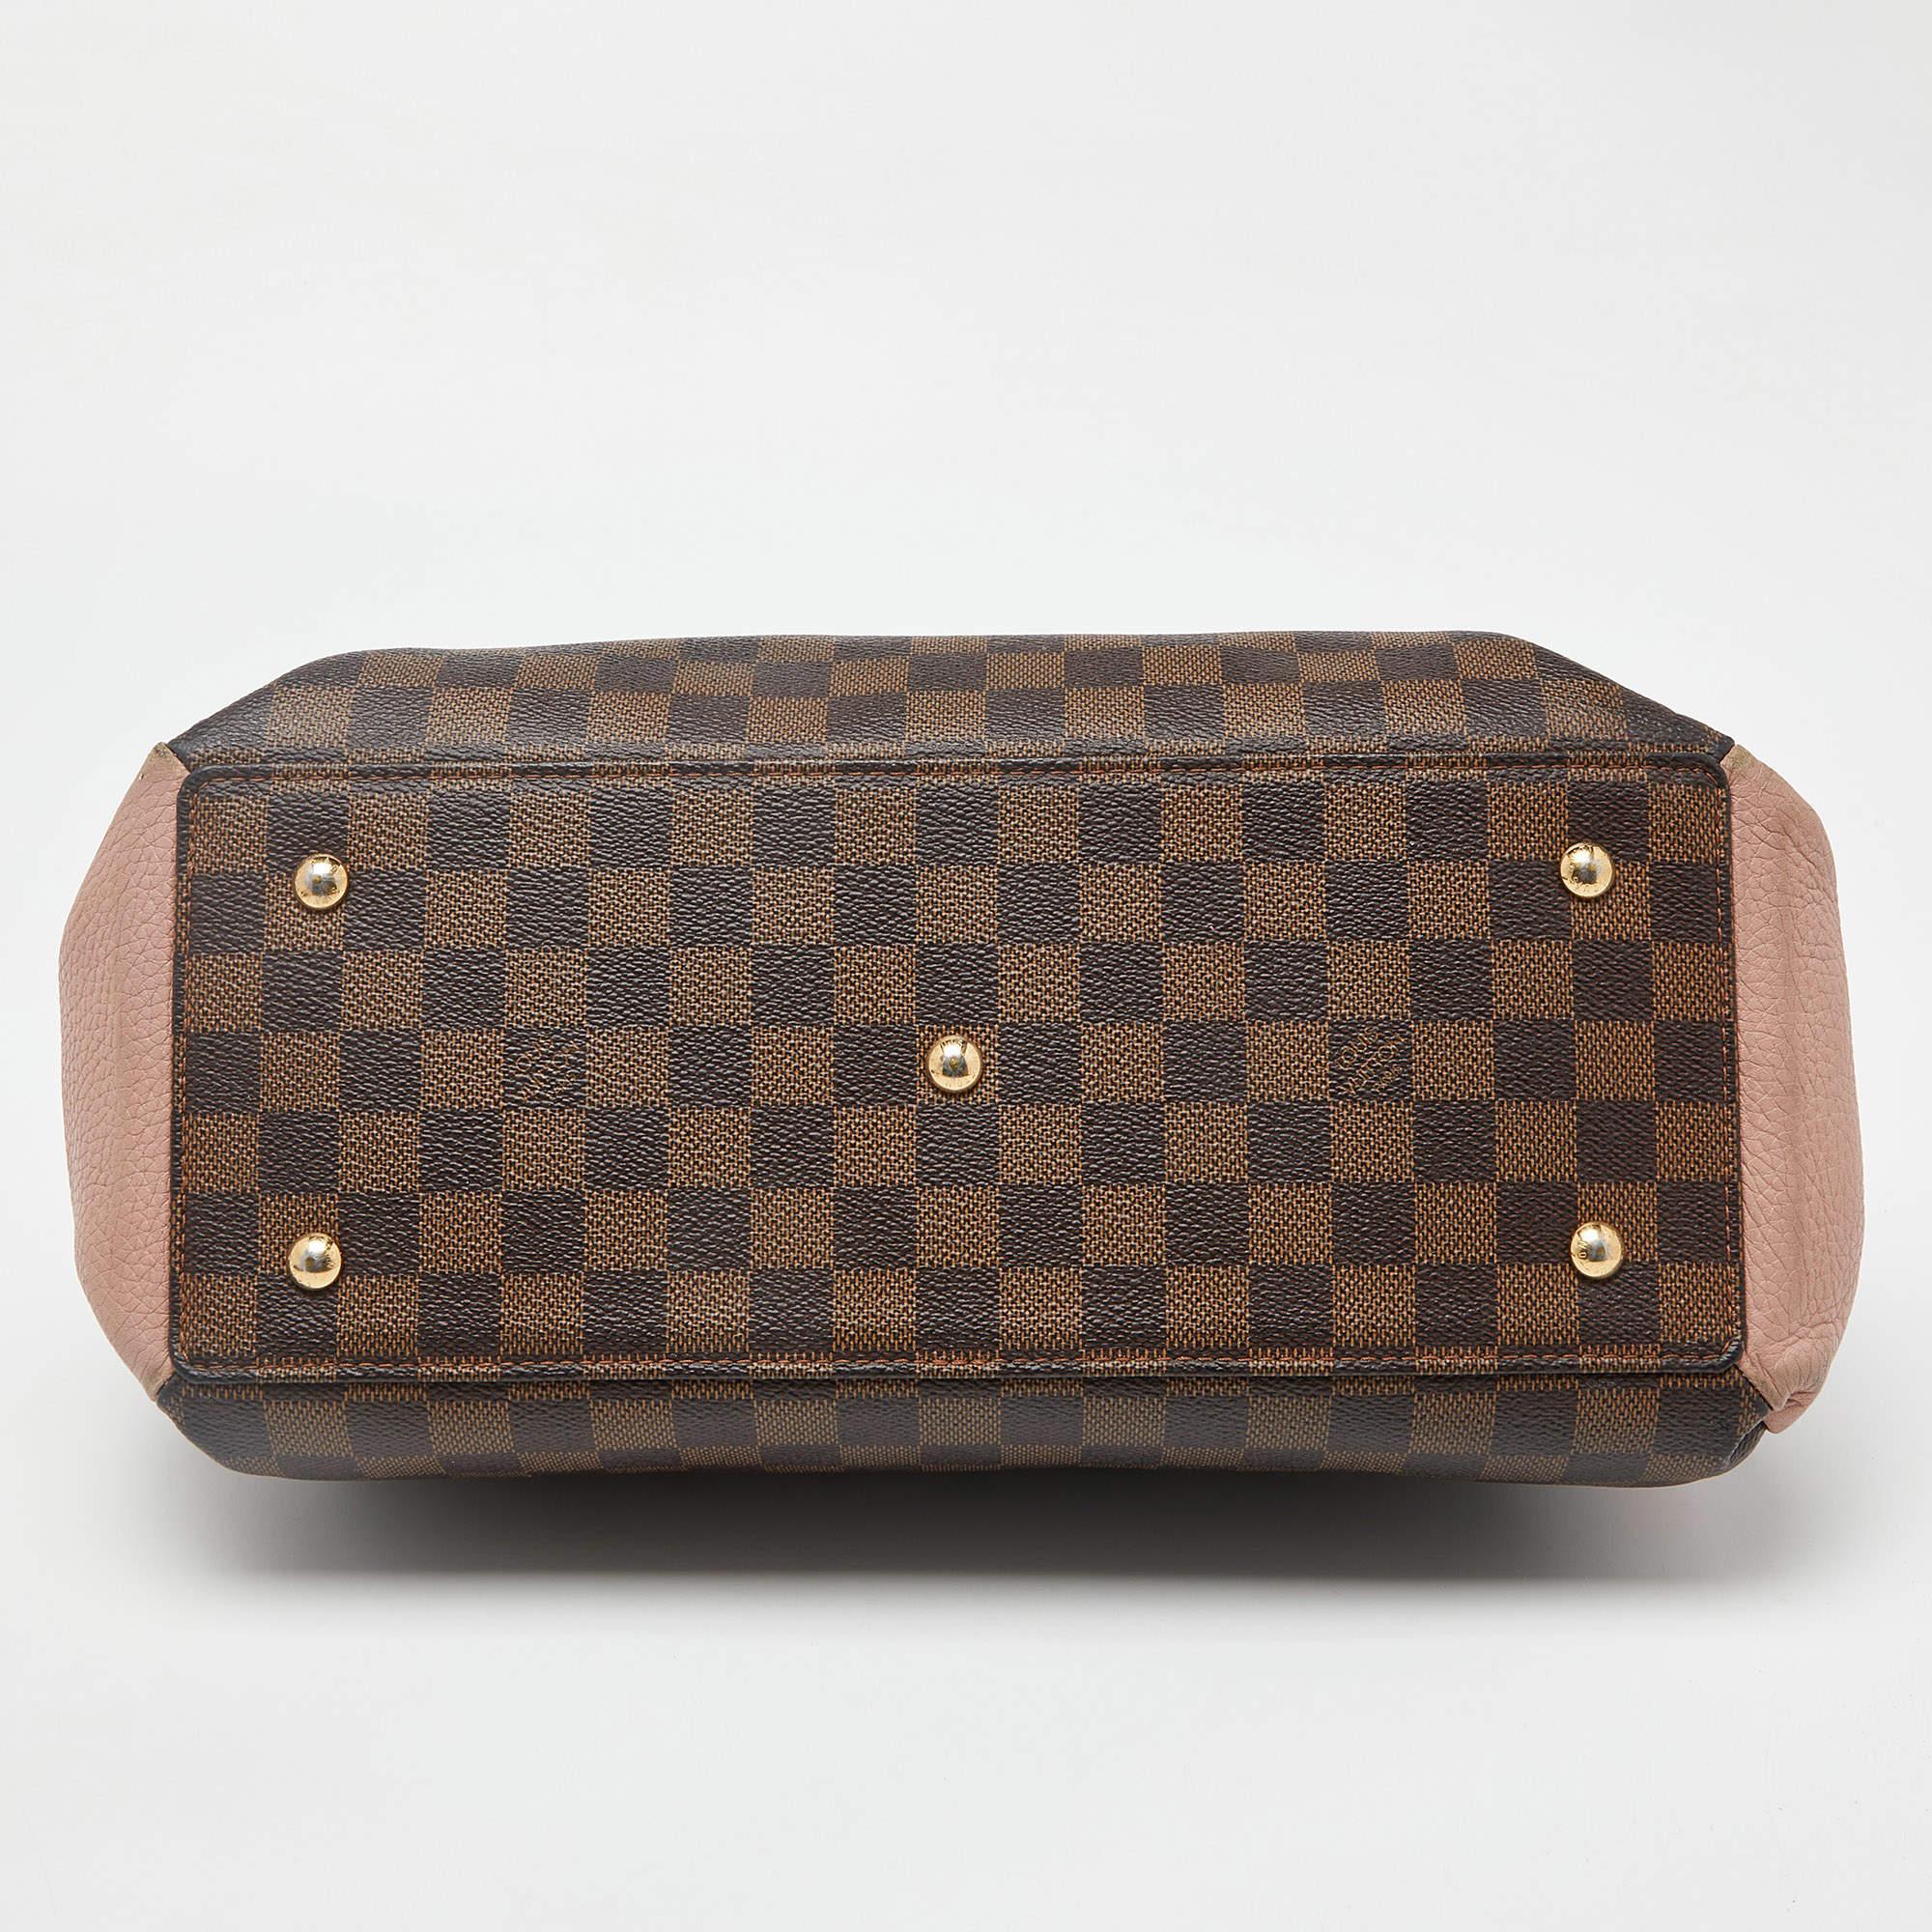 Louis Vuitton Damier Ebene Canvas and Leather Normandy Bag For Sale 4